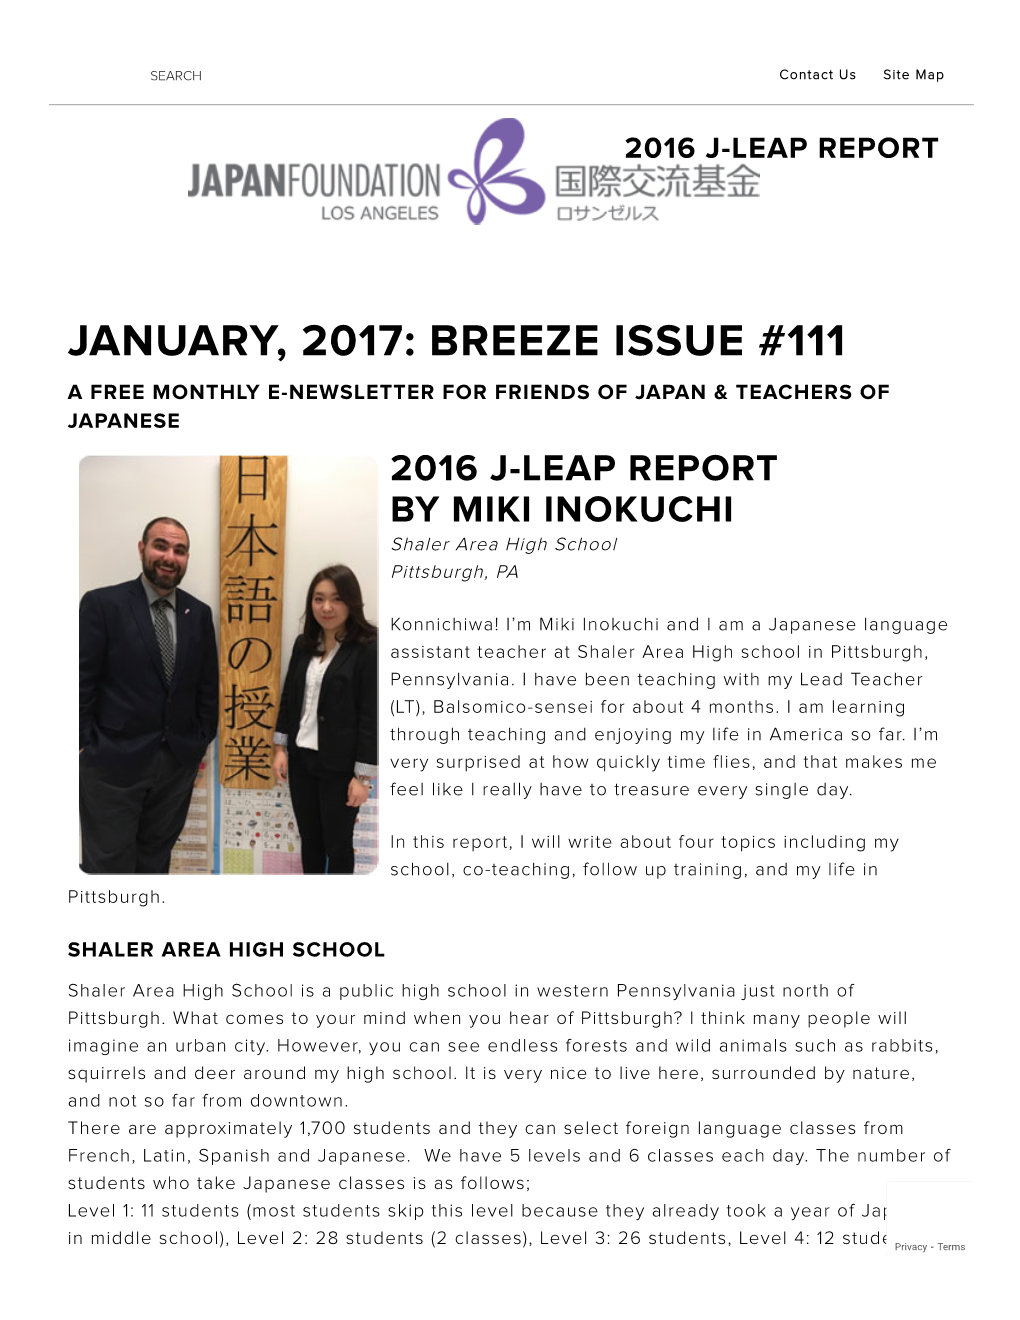 January, 2017: Breeze Issue #111